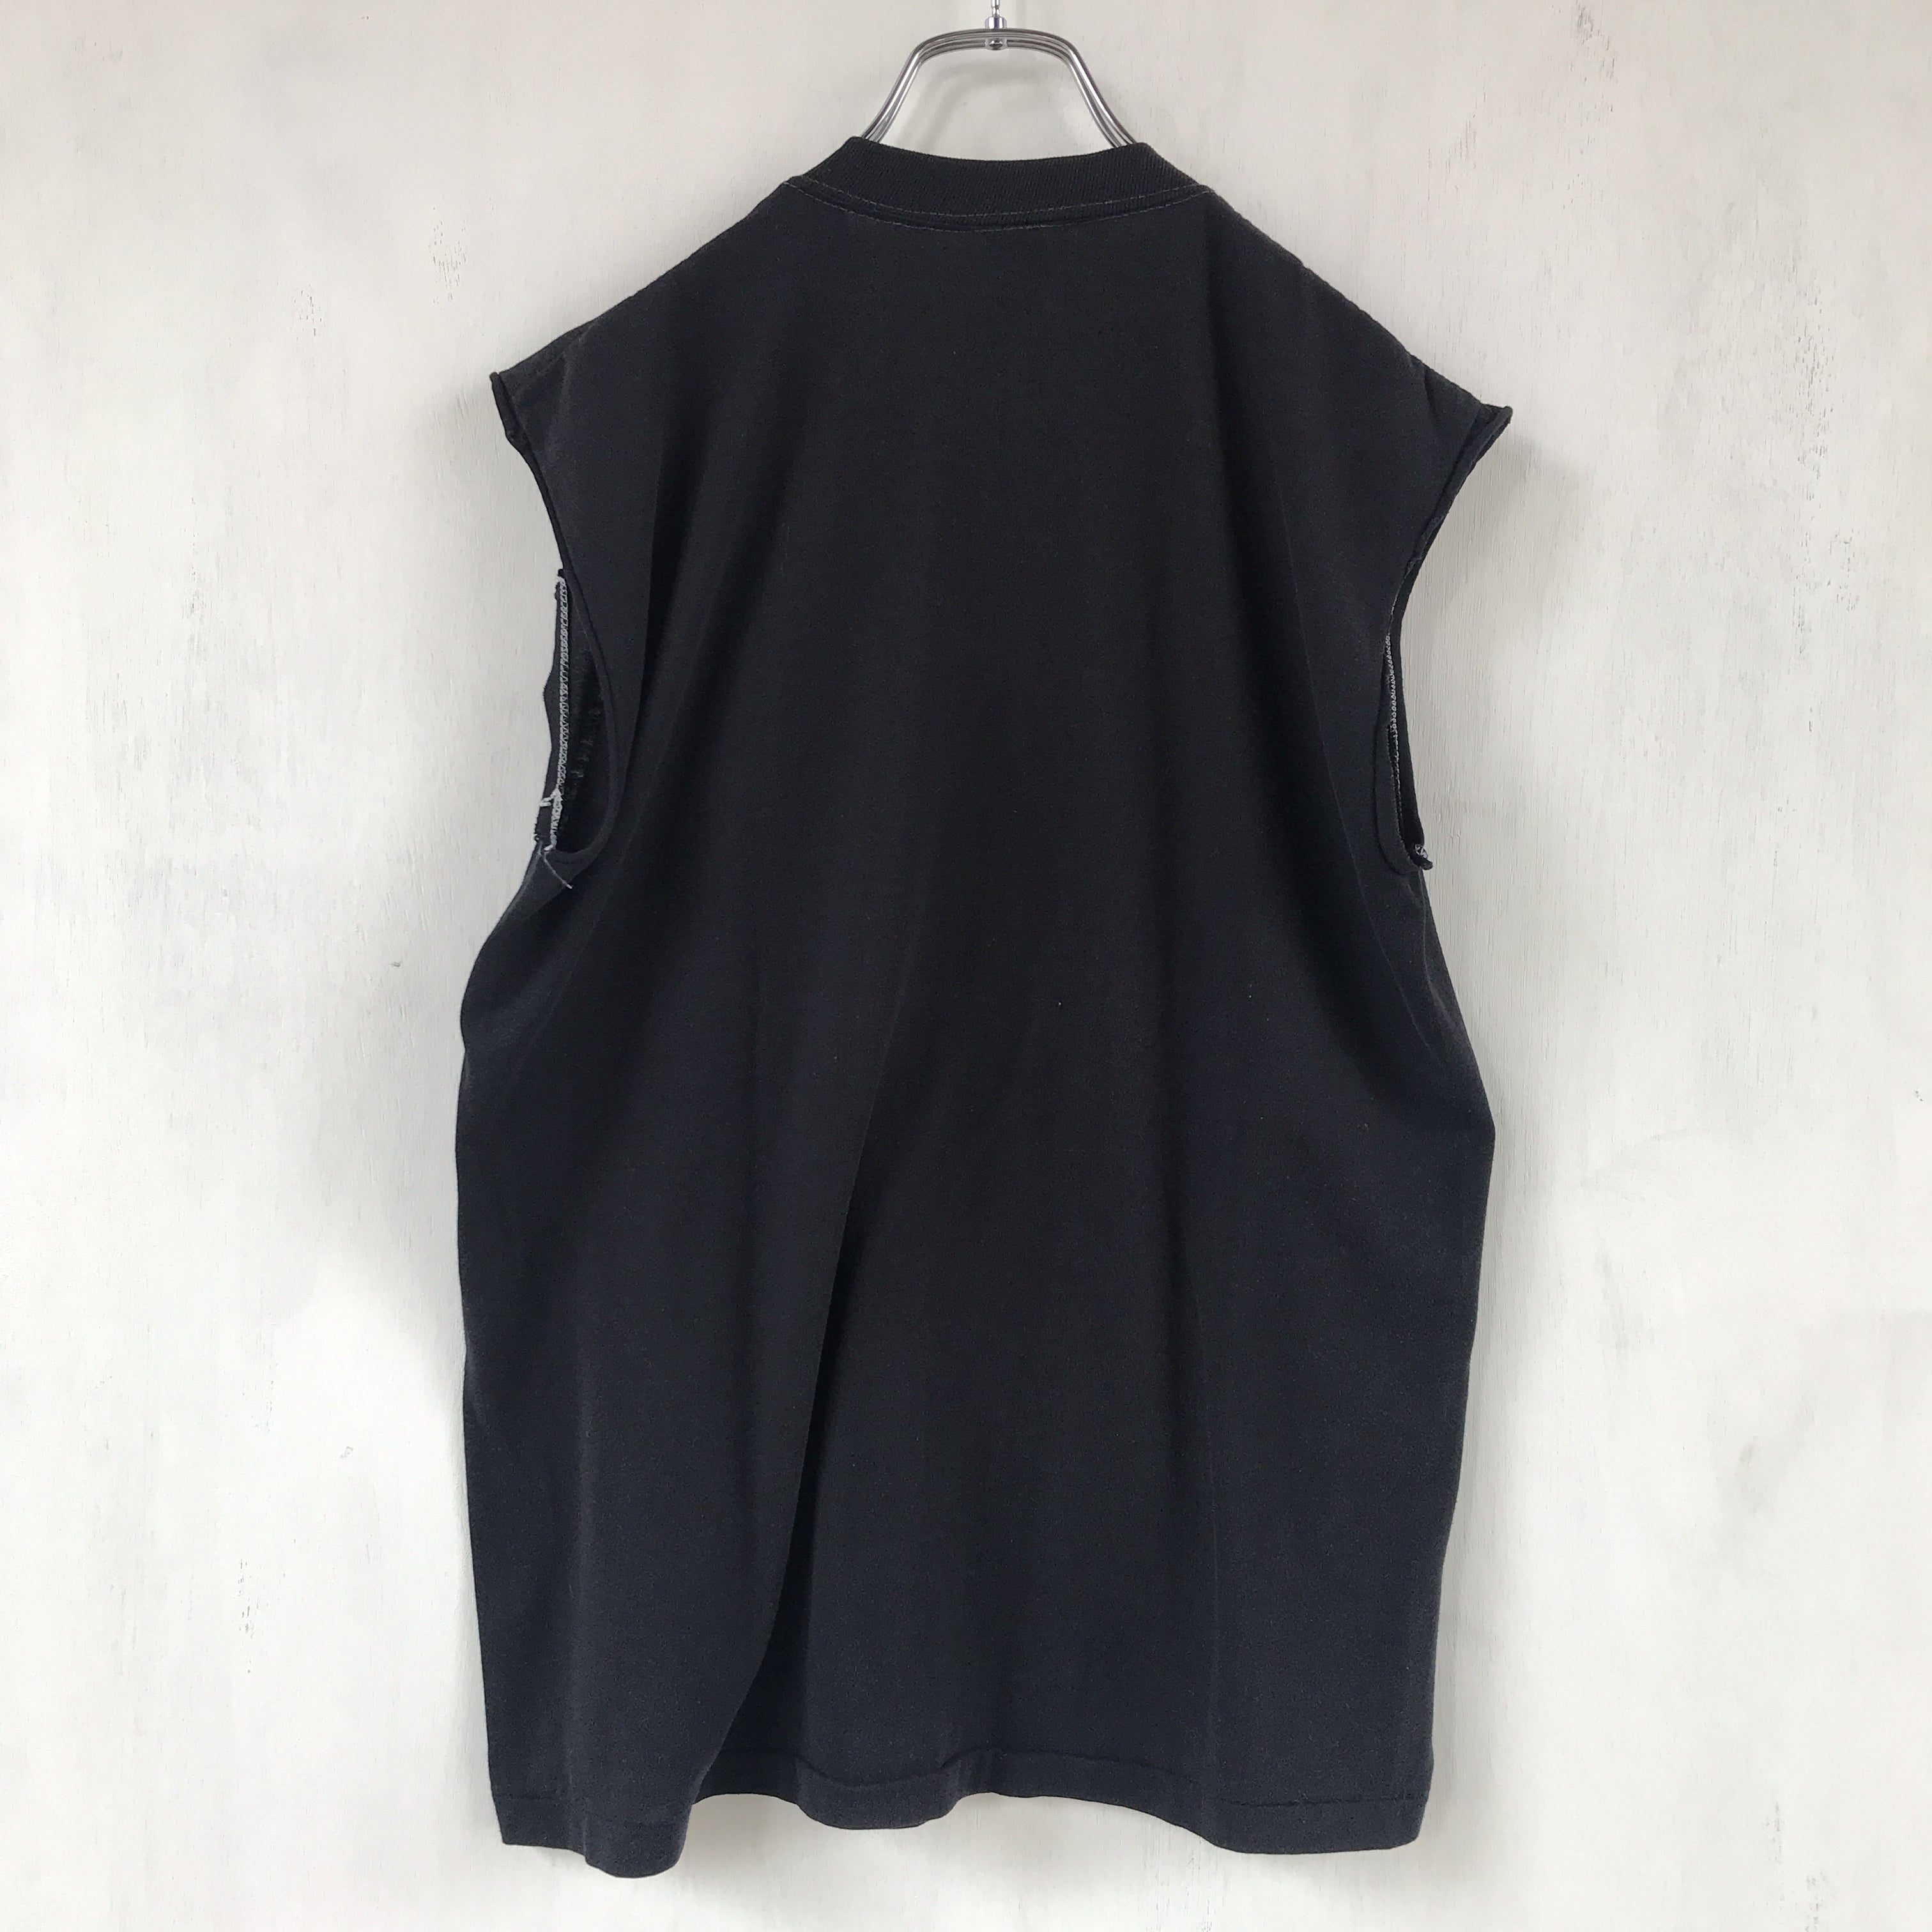 [ ONLY ONE ! ] AIR BORNE CUT OFF NO SLEEVE T-SHIRT / Mr.Clean Select